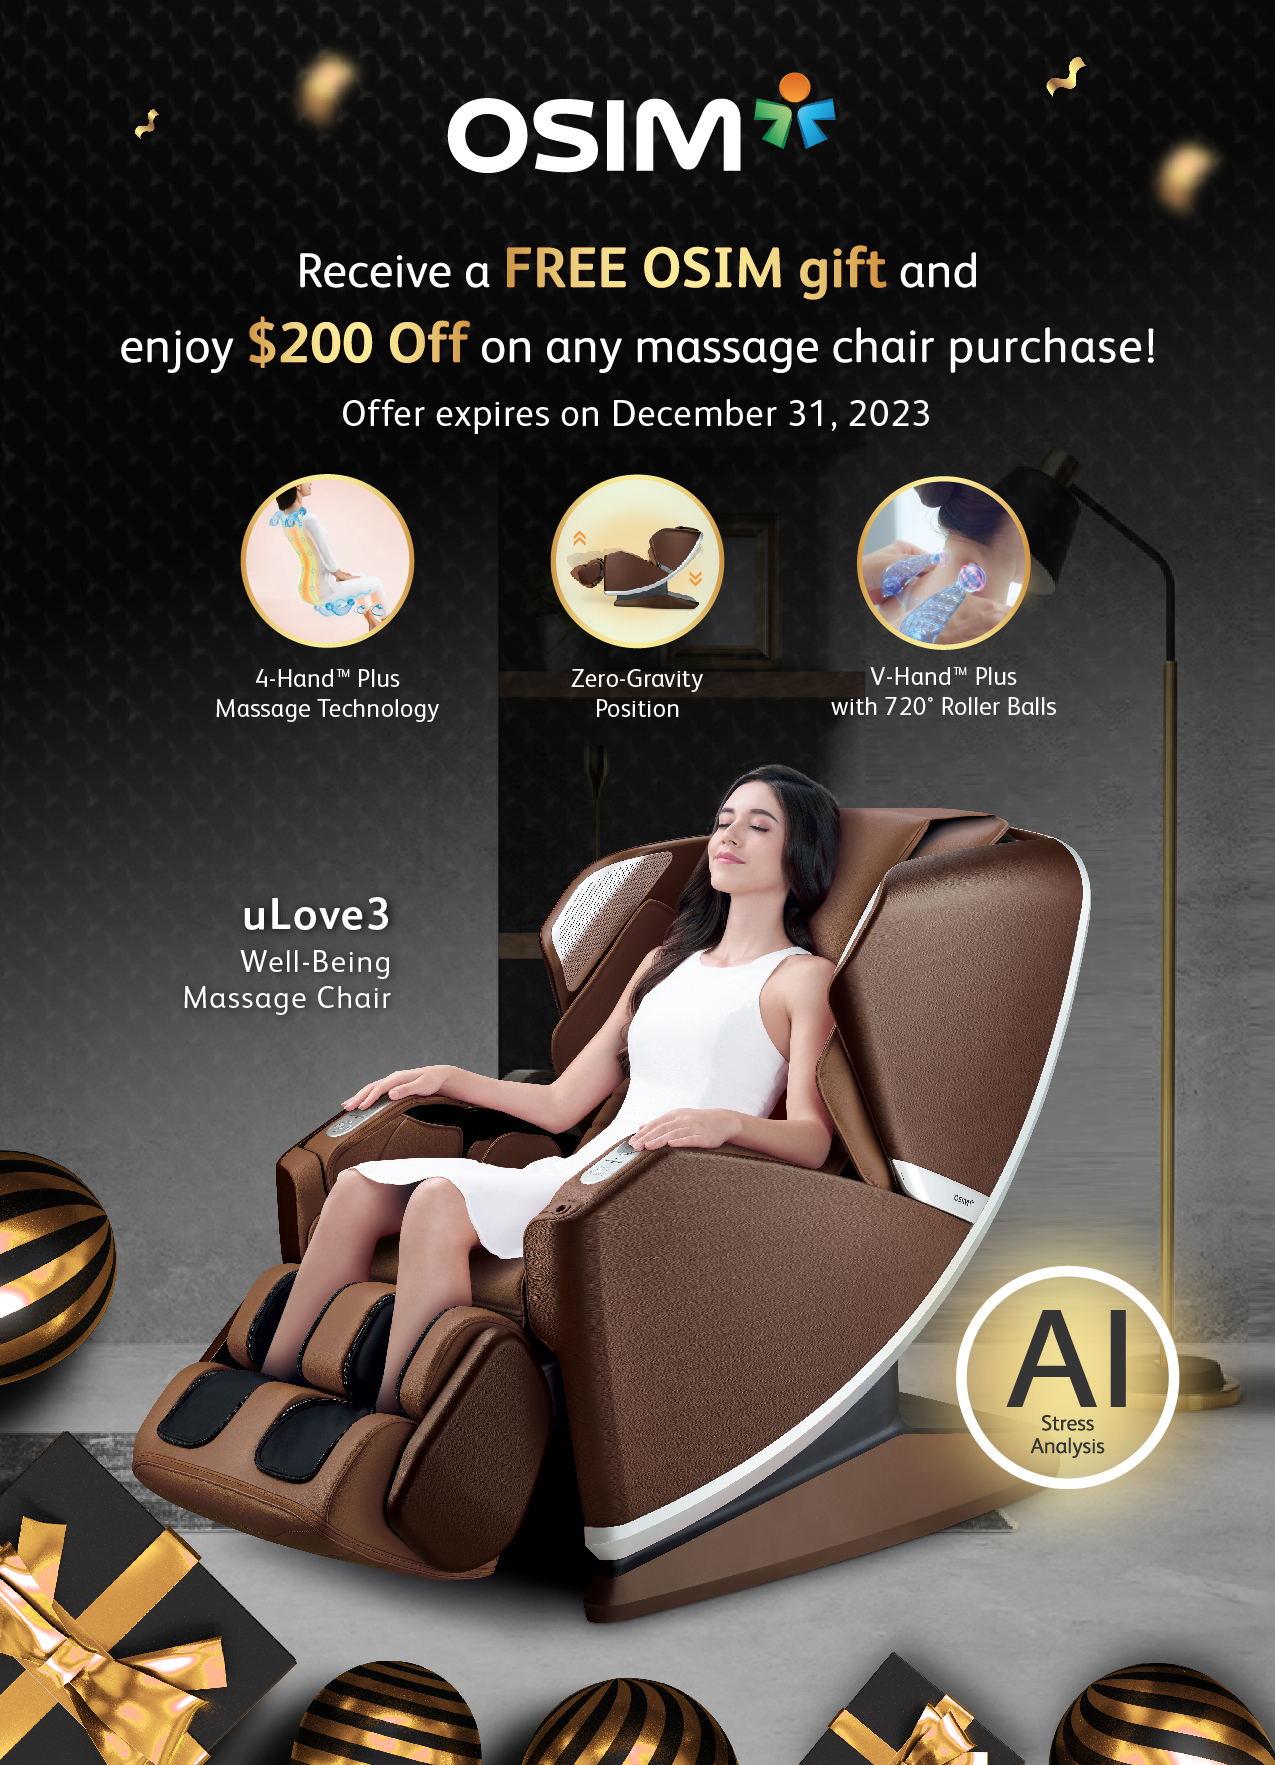 OSIM holiday gift deal for 2023